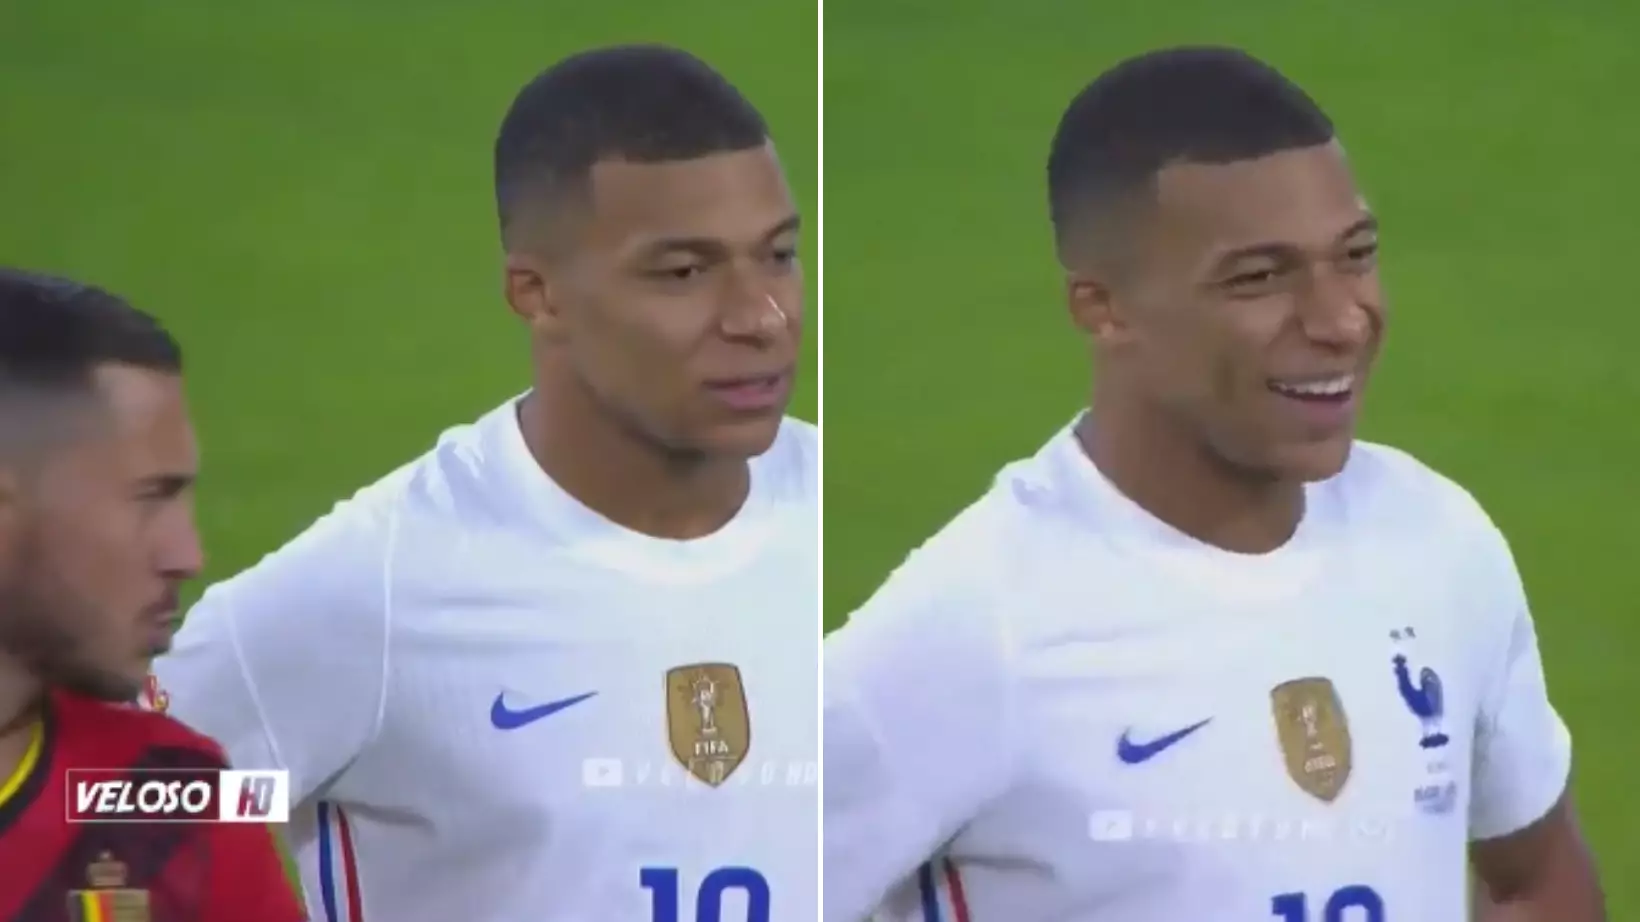 Kylian Mbappe's Reaction To Eden Hazard Appearing To Say 'Hala Madrid' Is Priceless